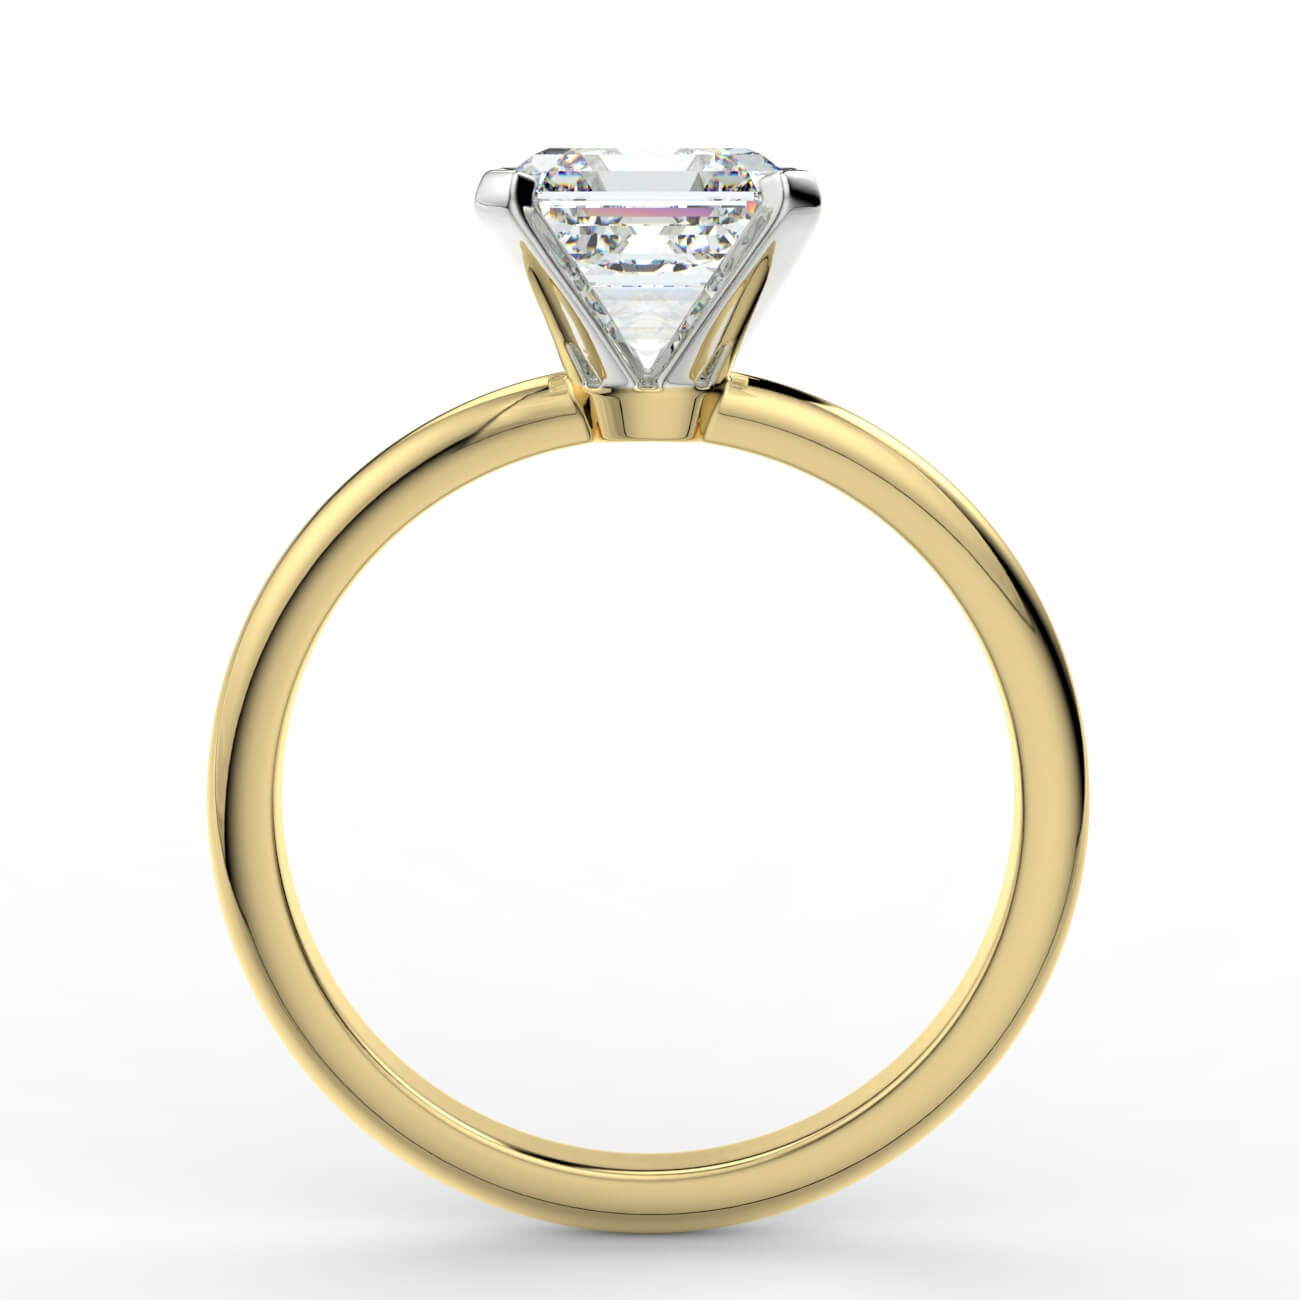 Knife-edge solitaire asscher cut diamond engagement ring in yellow and white gold – Australian Diamond Network